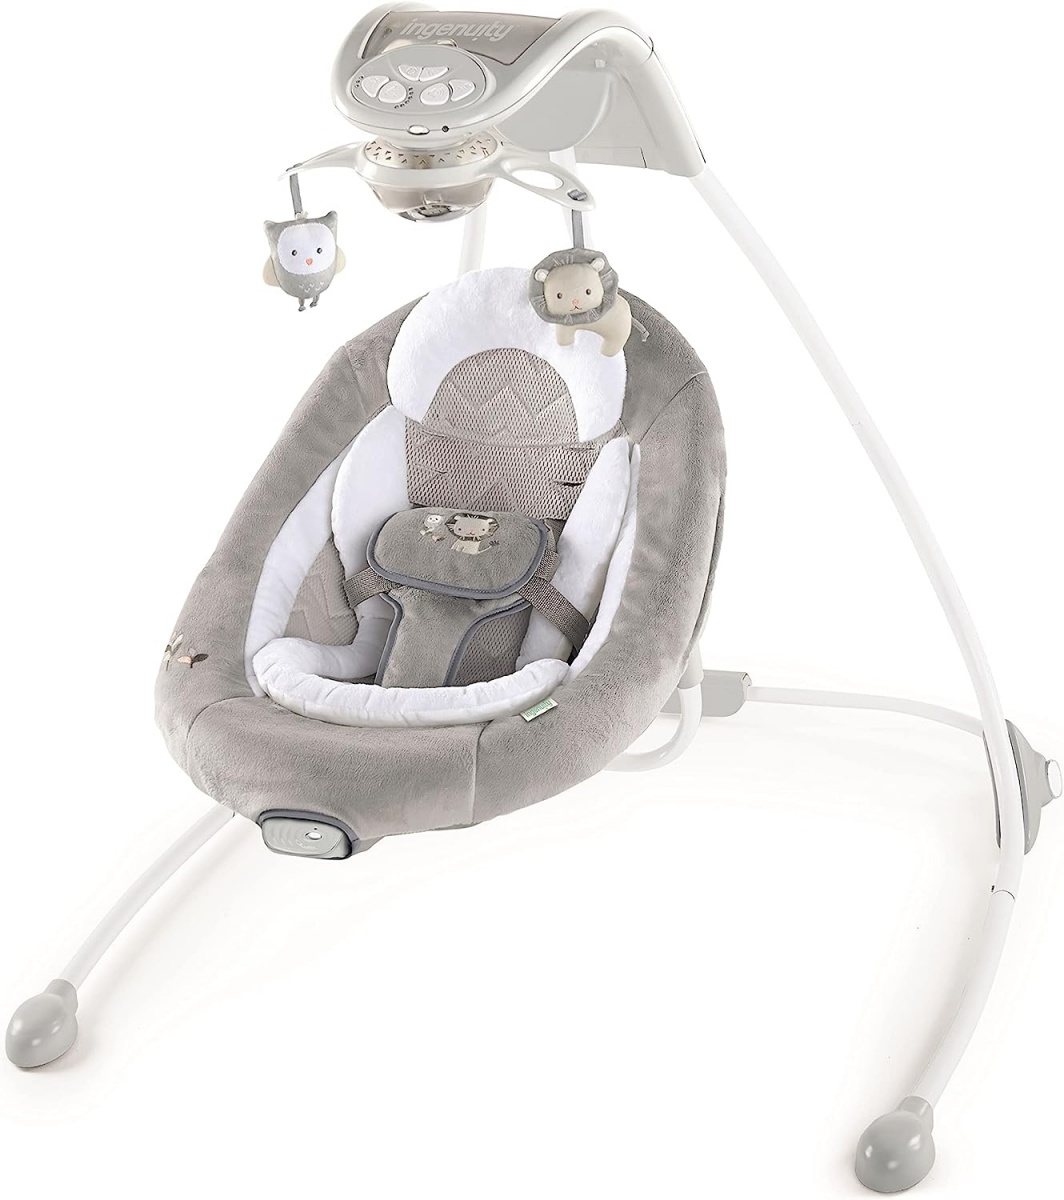  Baby Swing for Infants with Remote Control, Newborn Toddler  Electric Swinger Rocker Seat, 0-9 Months, Portable Bouncer for Outdoor and  Indoor Use, 5 Speed, Simple, Safe, Compact Newborn Essentials : Baby